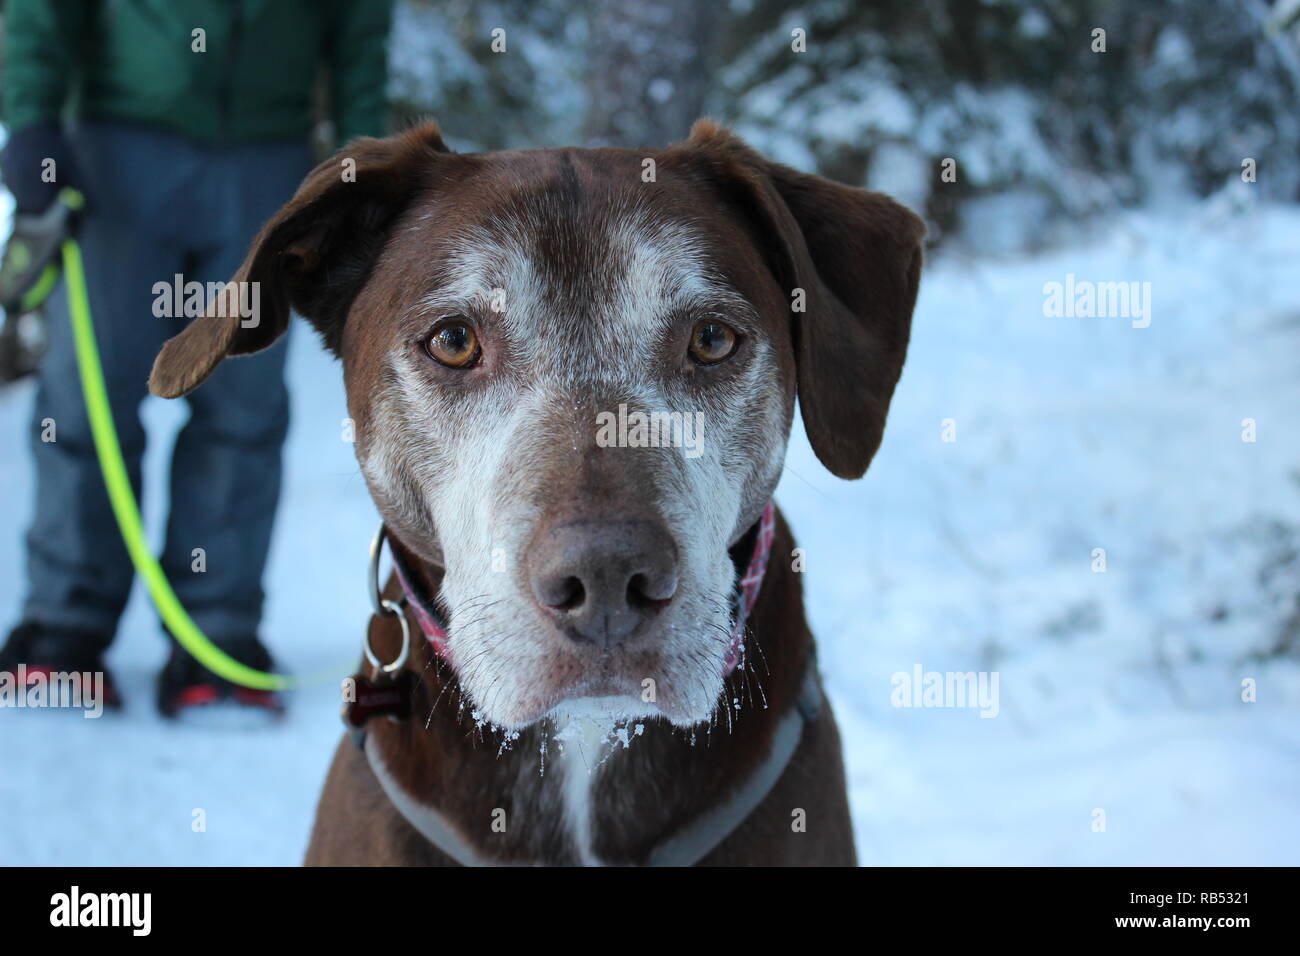 Snowshoeing with dogs Stock Photo